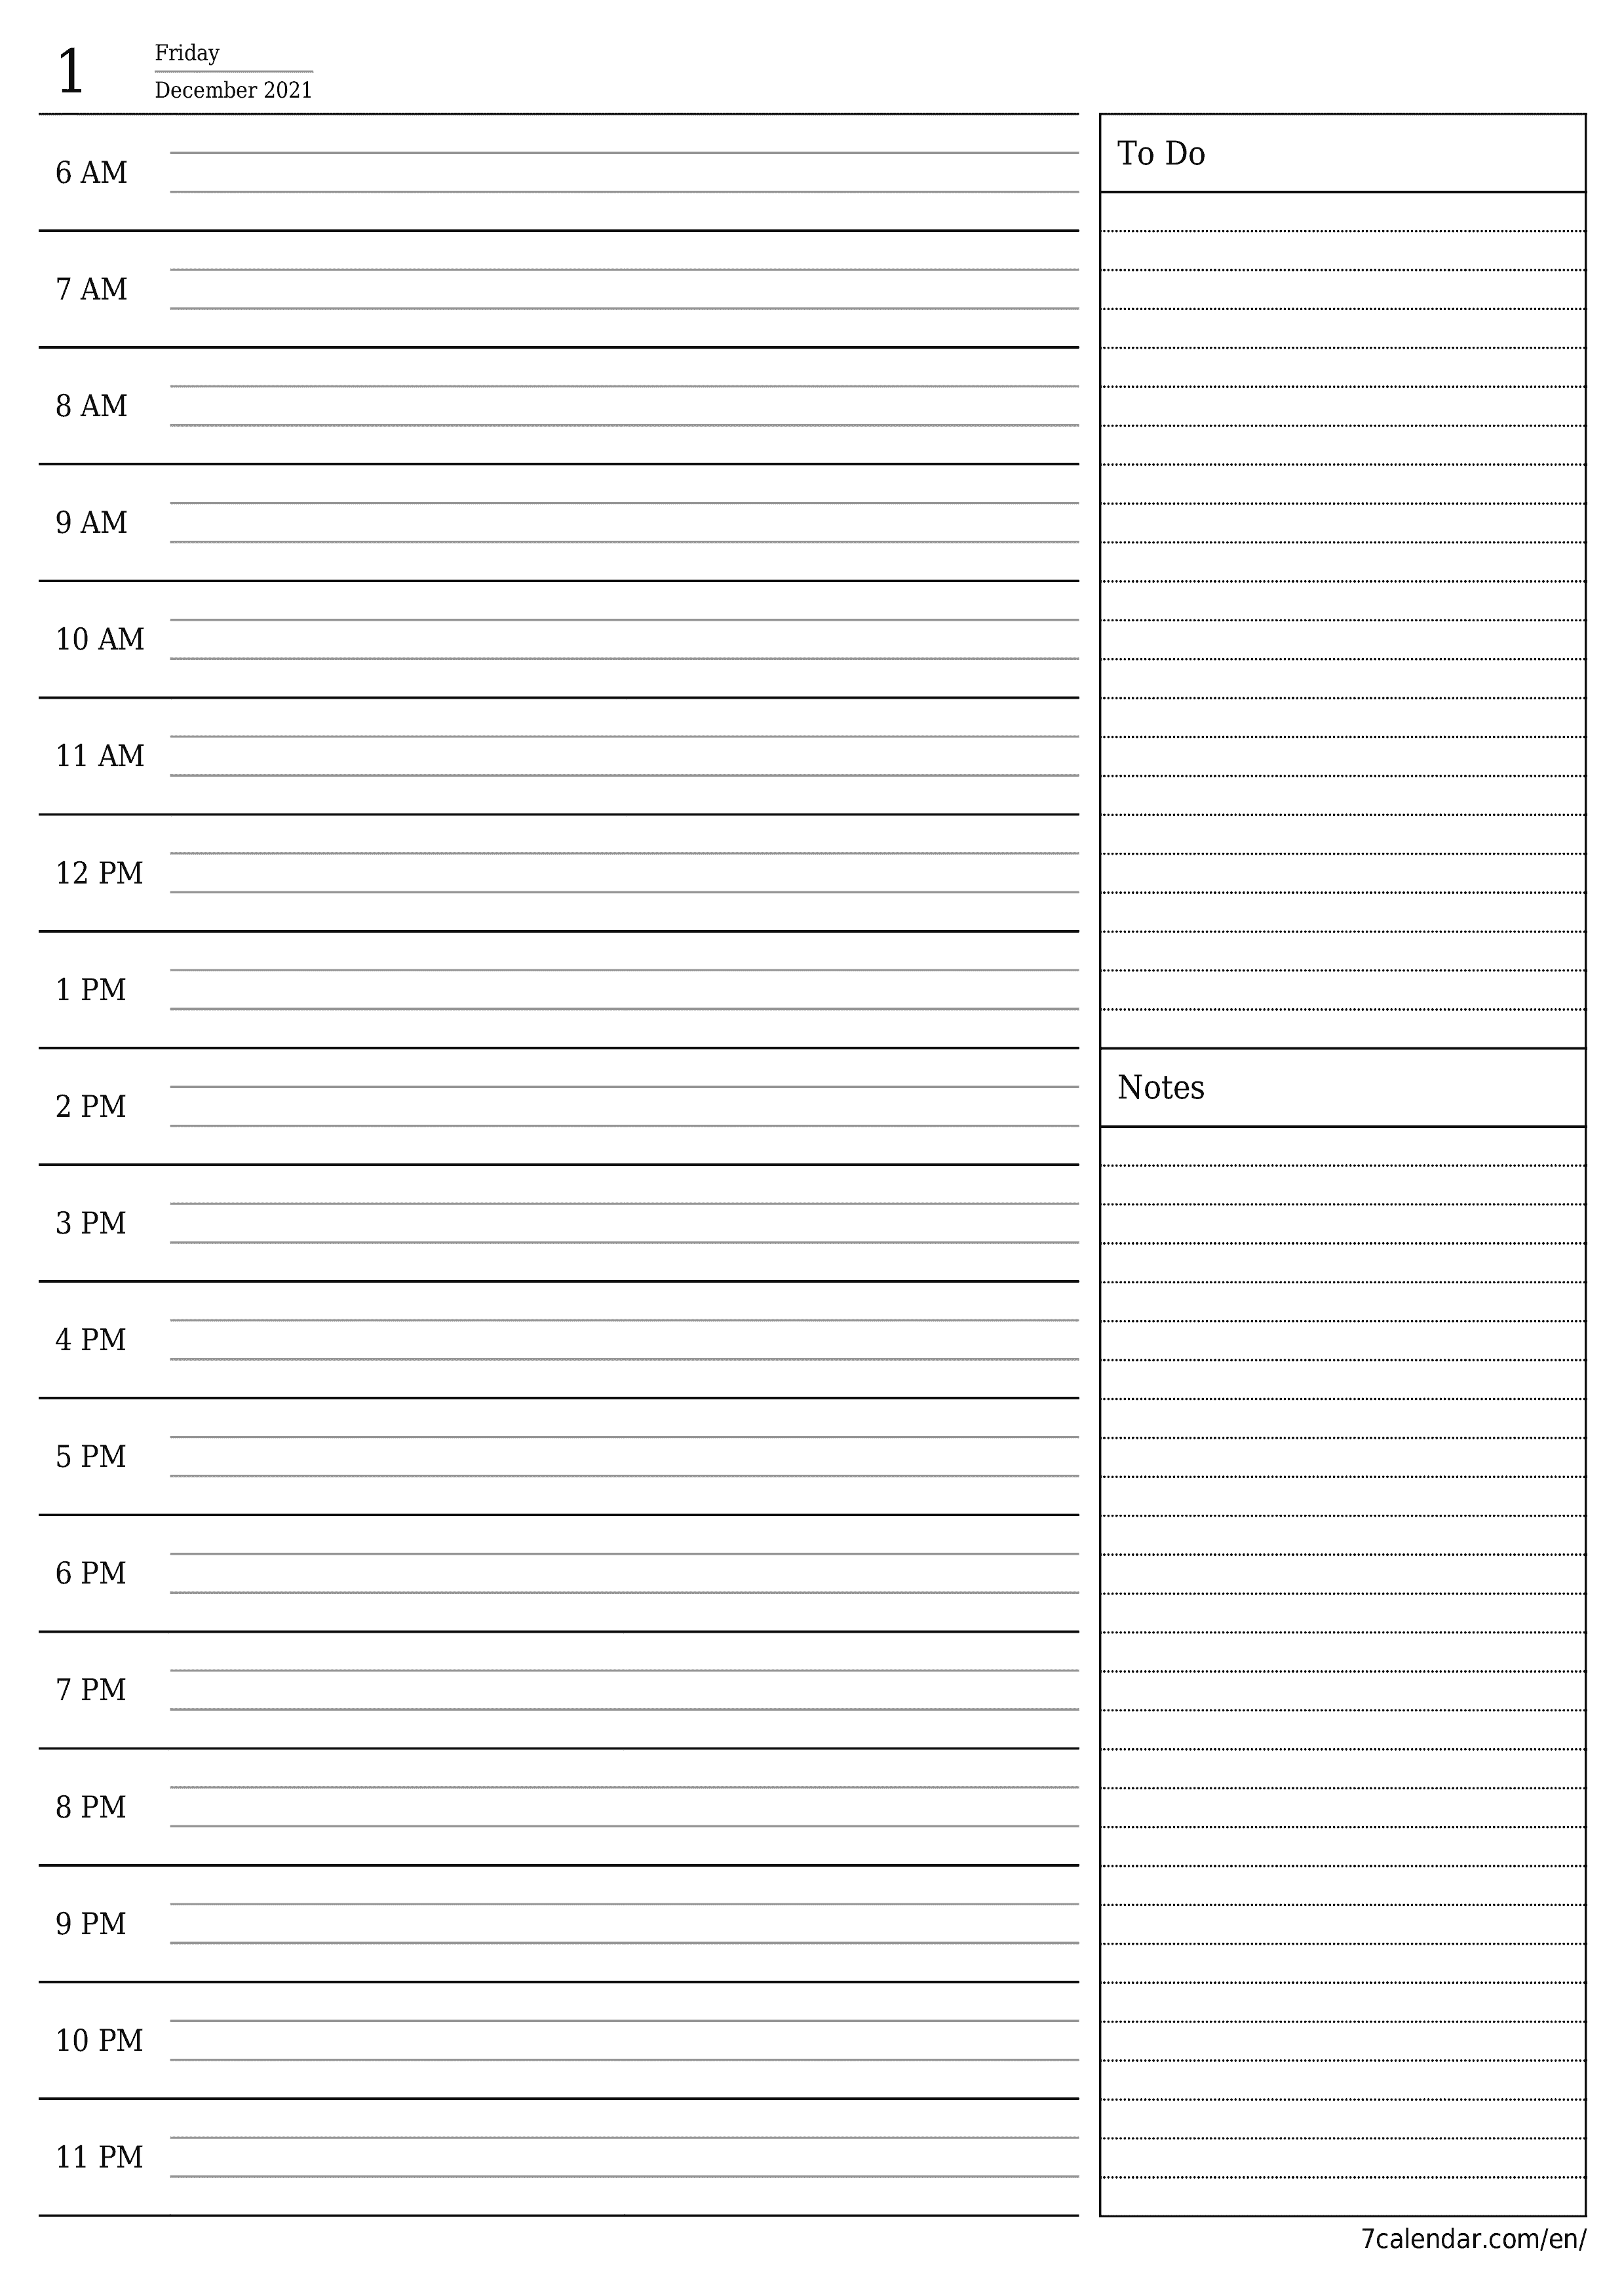 Blank daily calendar planner for day December 2021 with notes, save and print to PDF PNG English - 7calendar.com